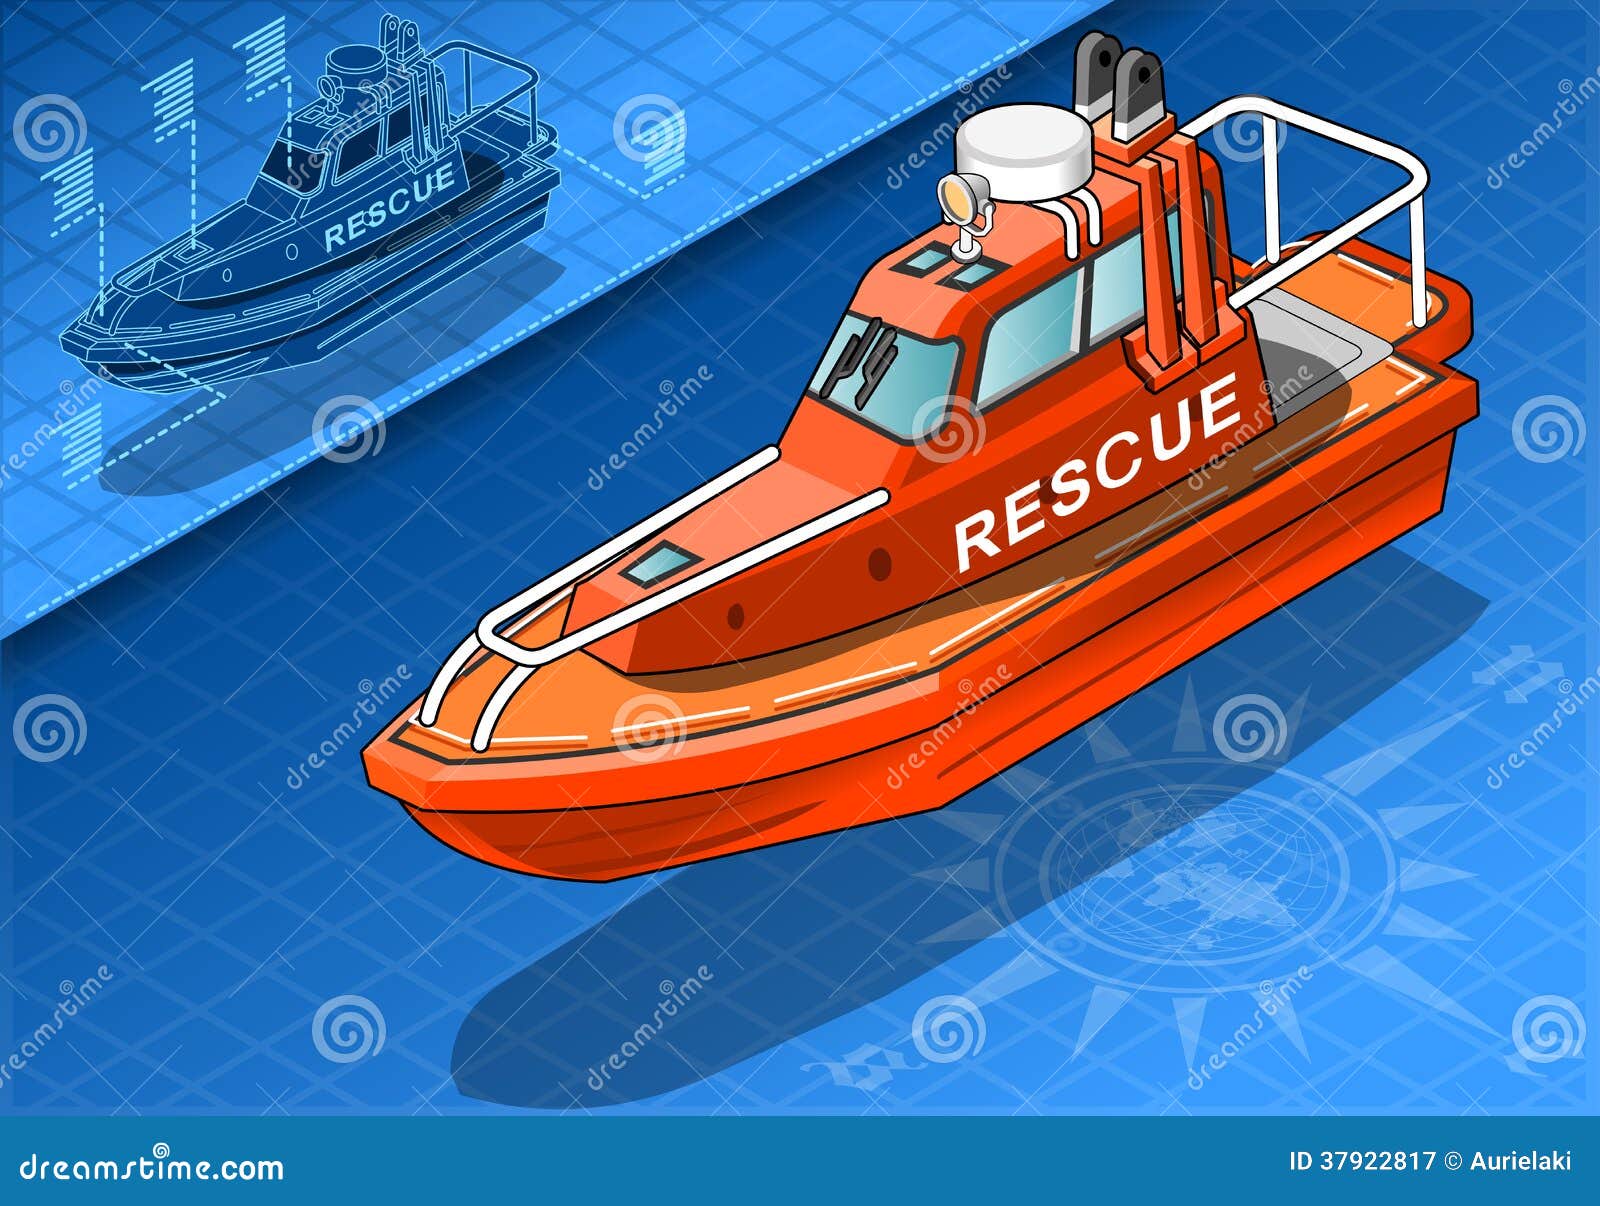 Isometric Rescue Boat In Front View Royalty Free Stock ...